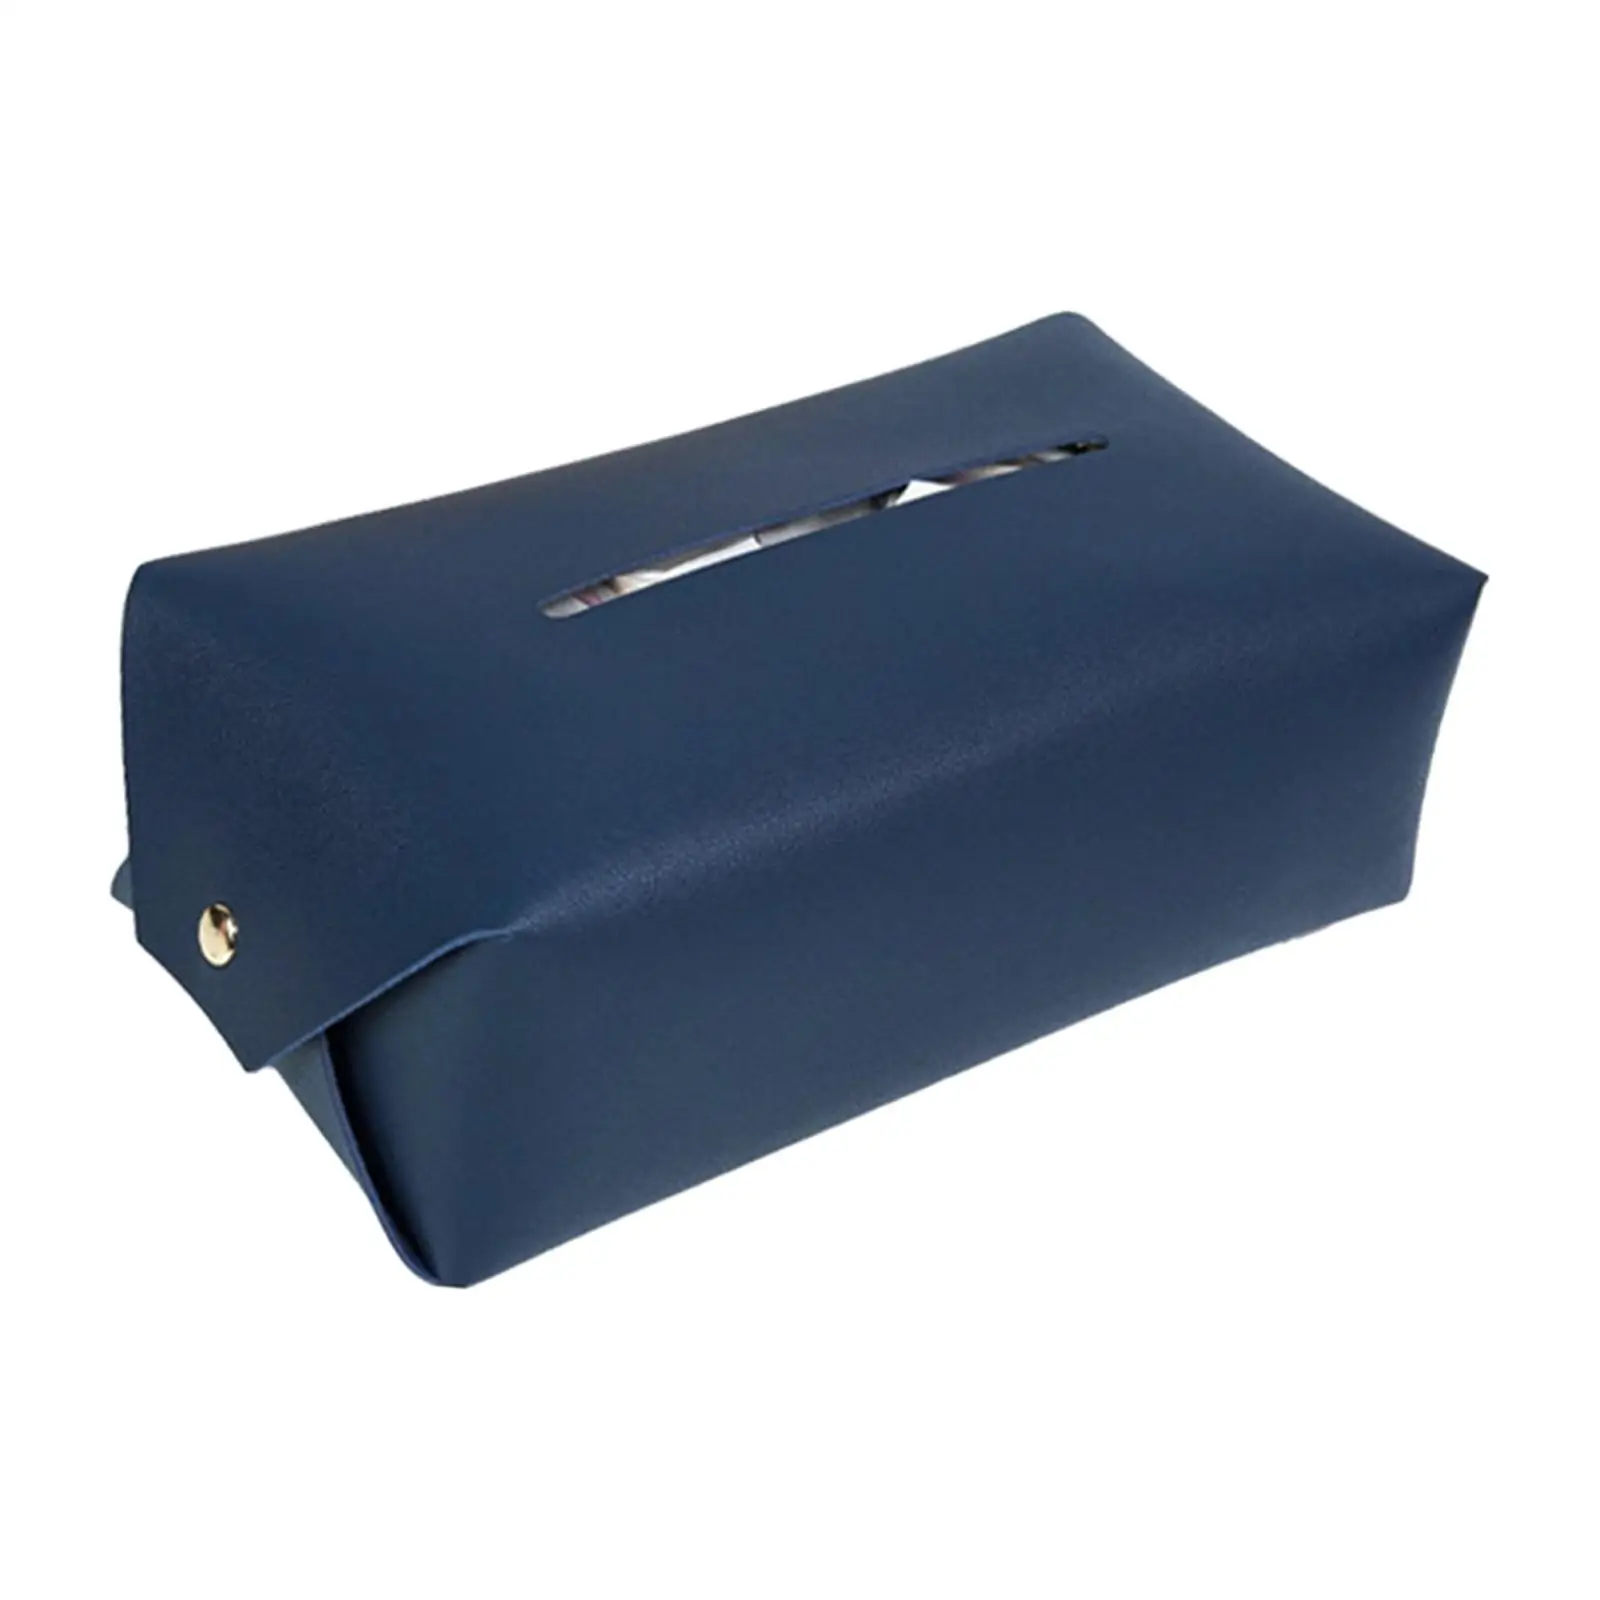 PU Leather Tissue Box Case Storage Box for Office Vanity Countertop Car